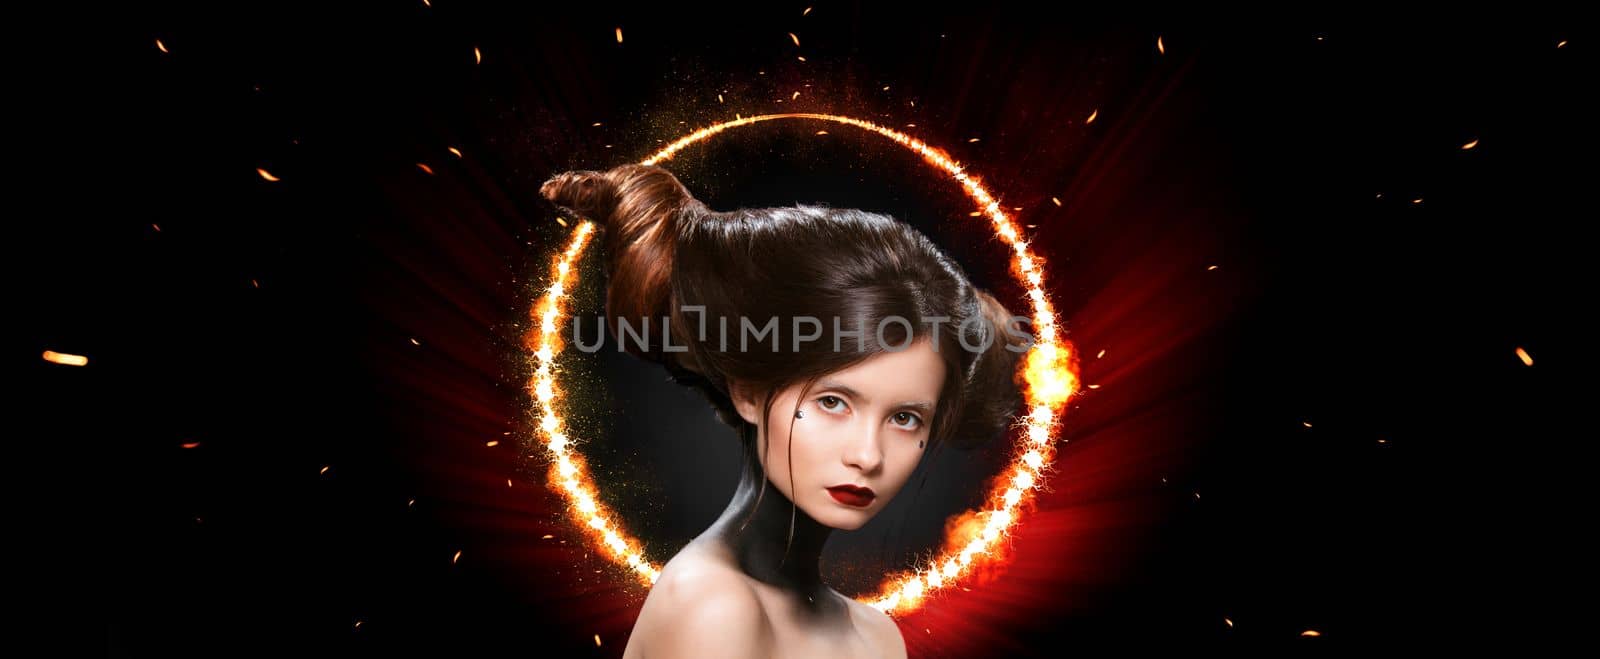 A girl in a glowing neon circle. Woman in color body painting on her face. Design for a poster for a nightclub or karaoke bar on helloween,